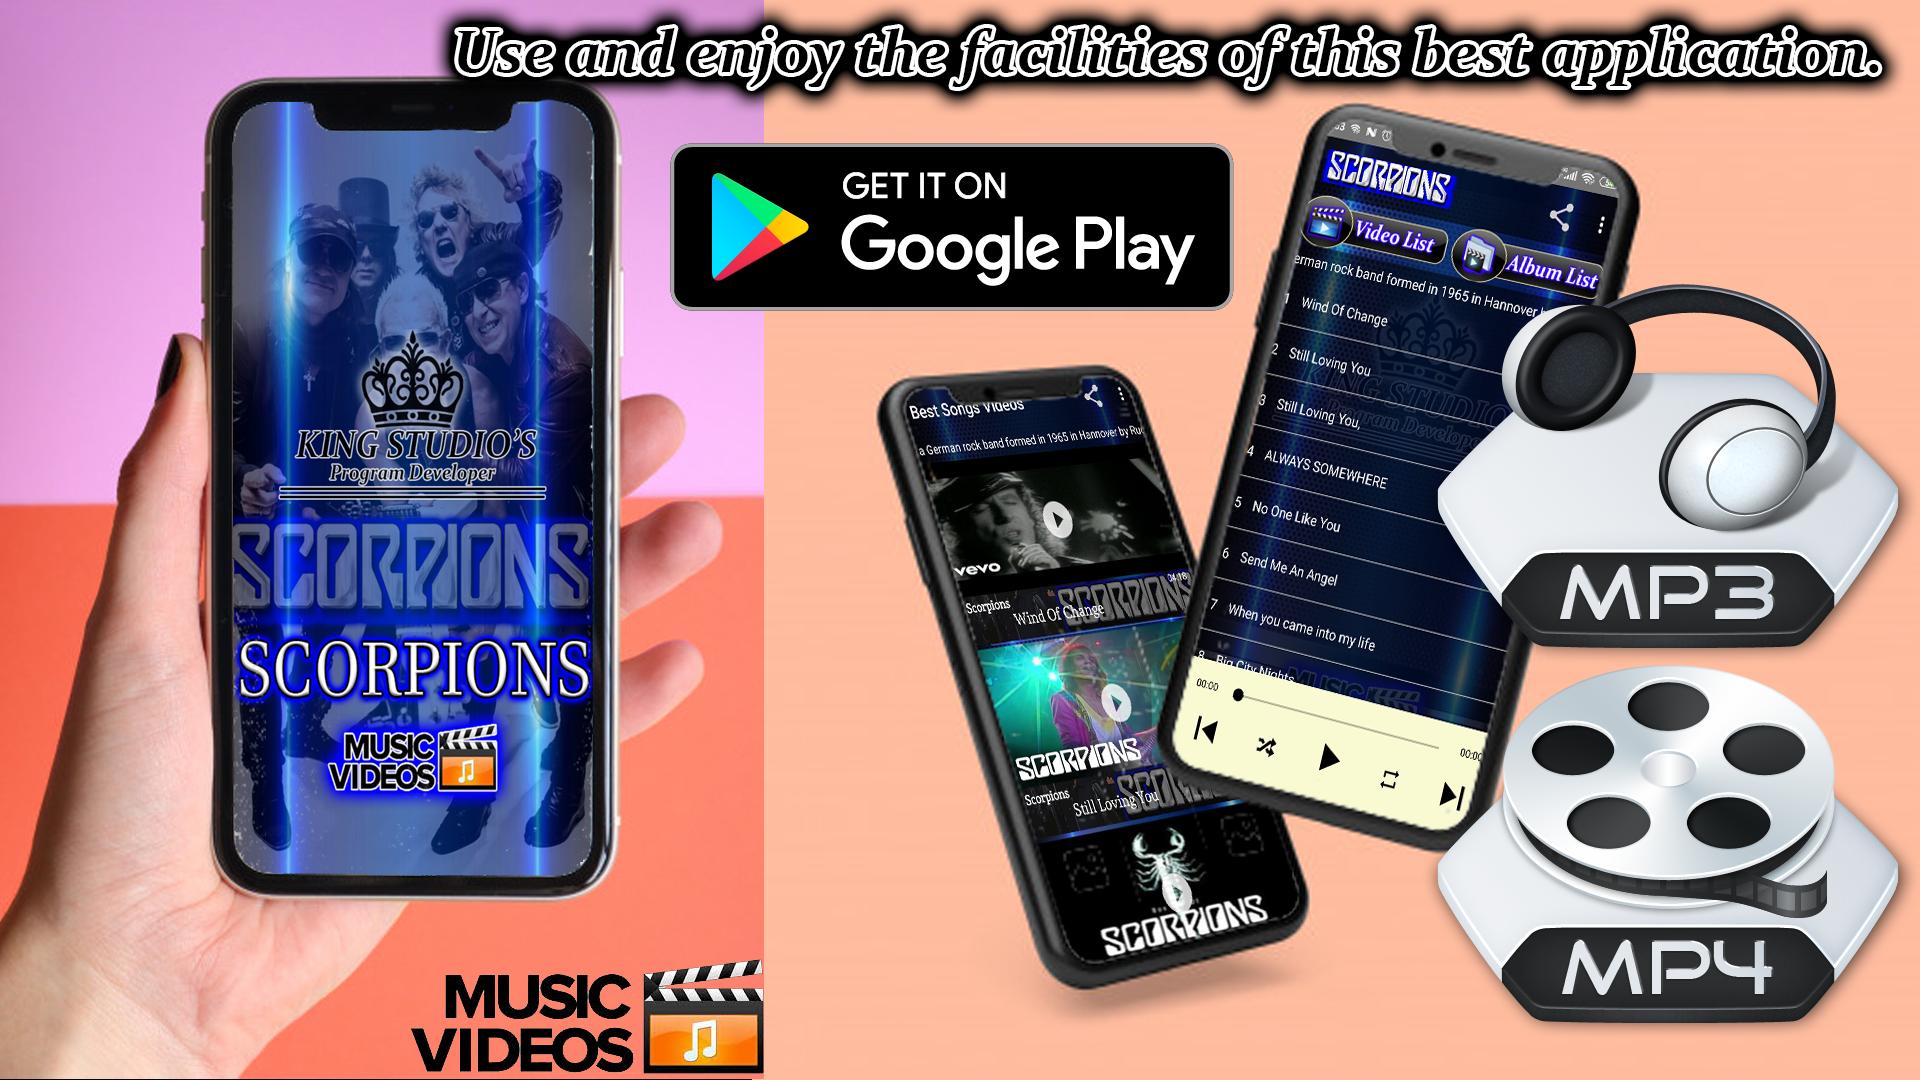 SCORPIONS - Offline MP3 & Video Album Collection for Android - APK Download